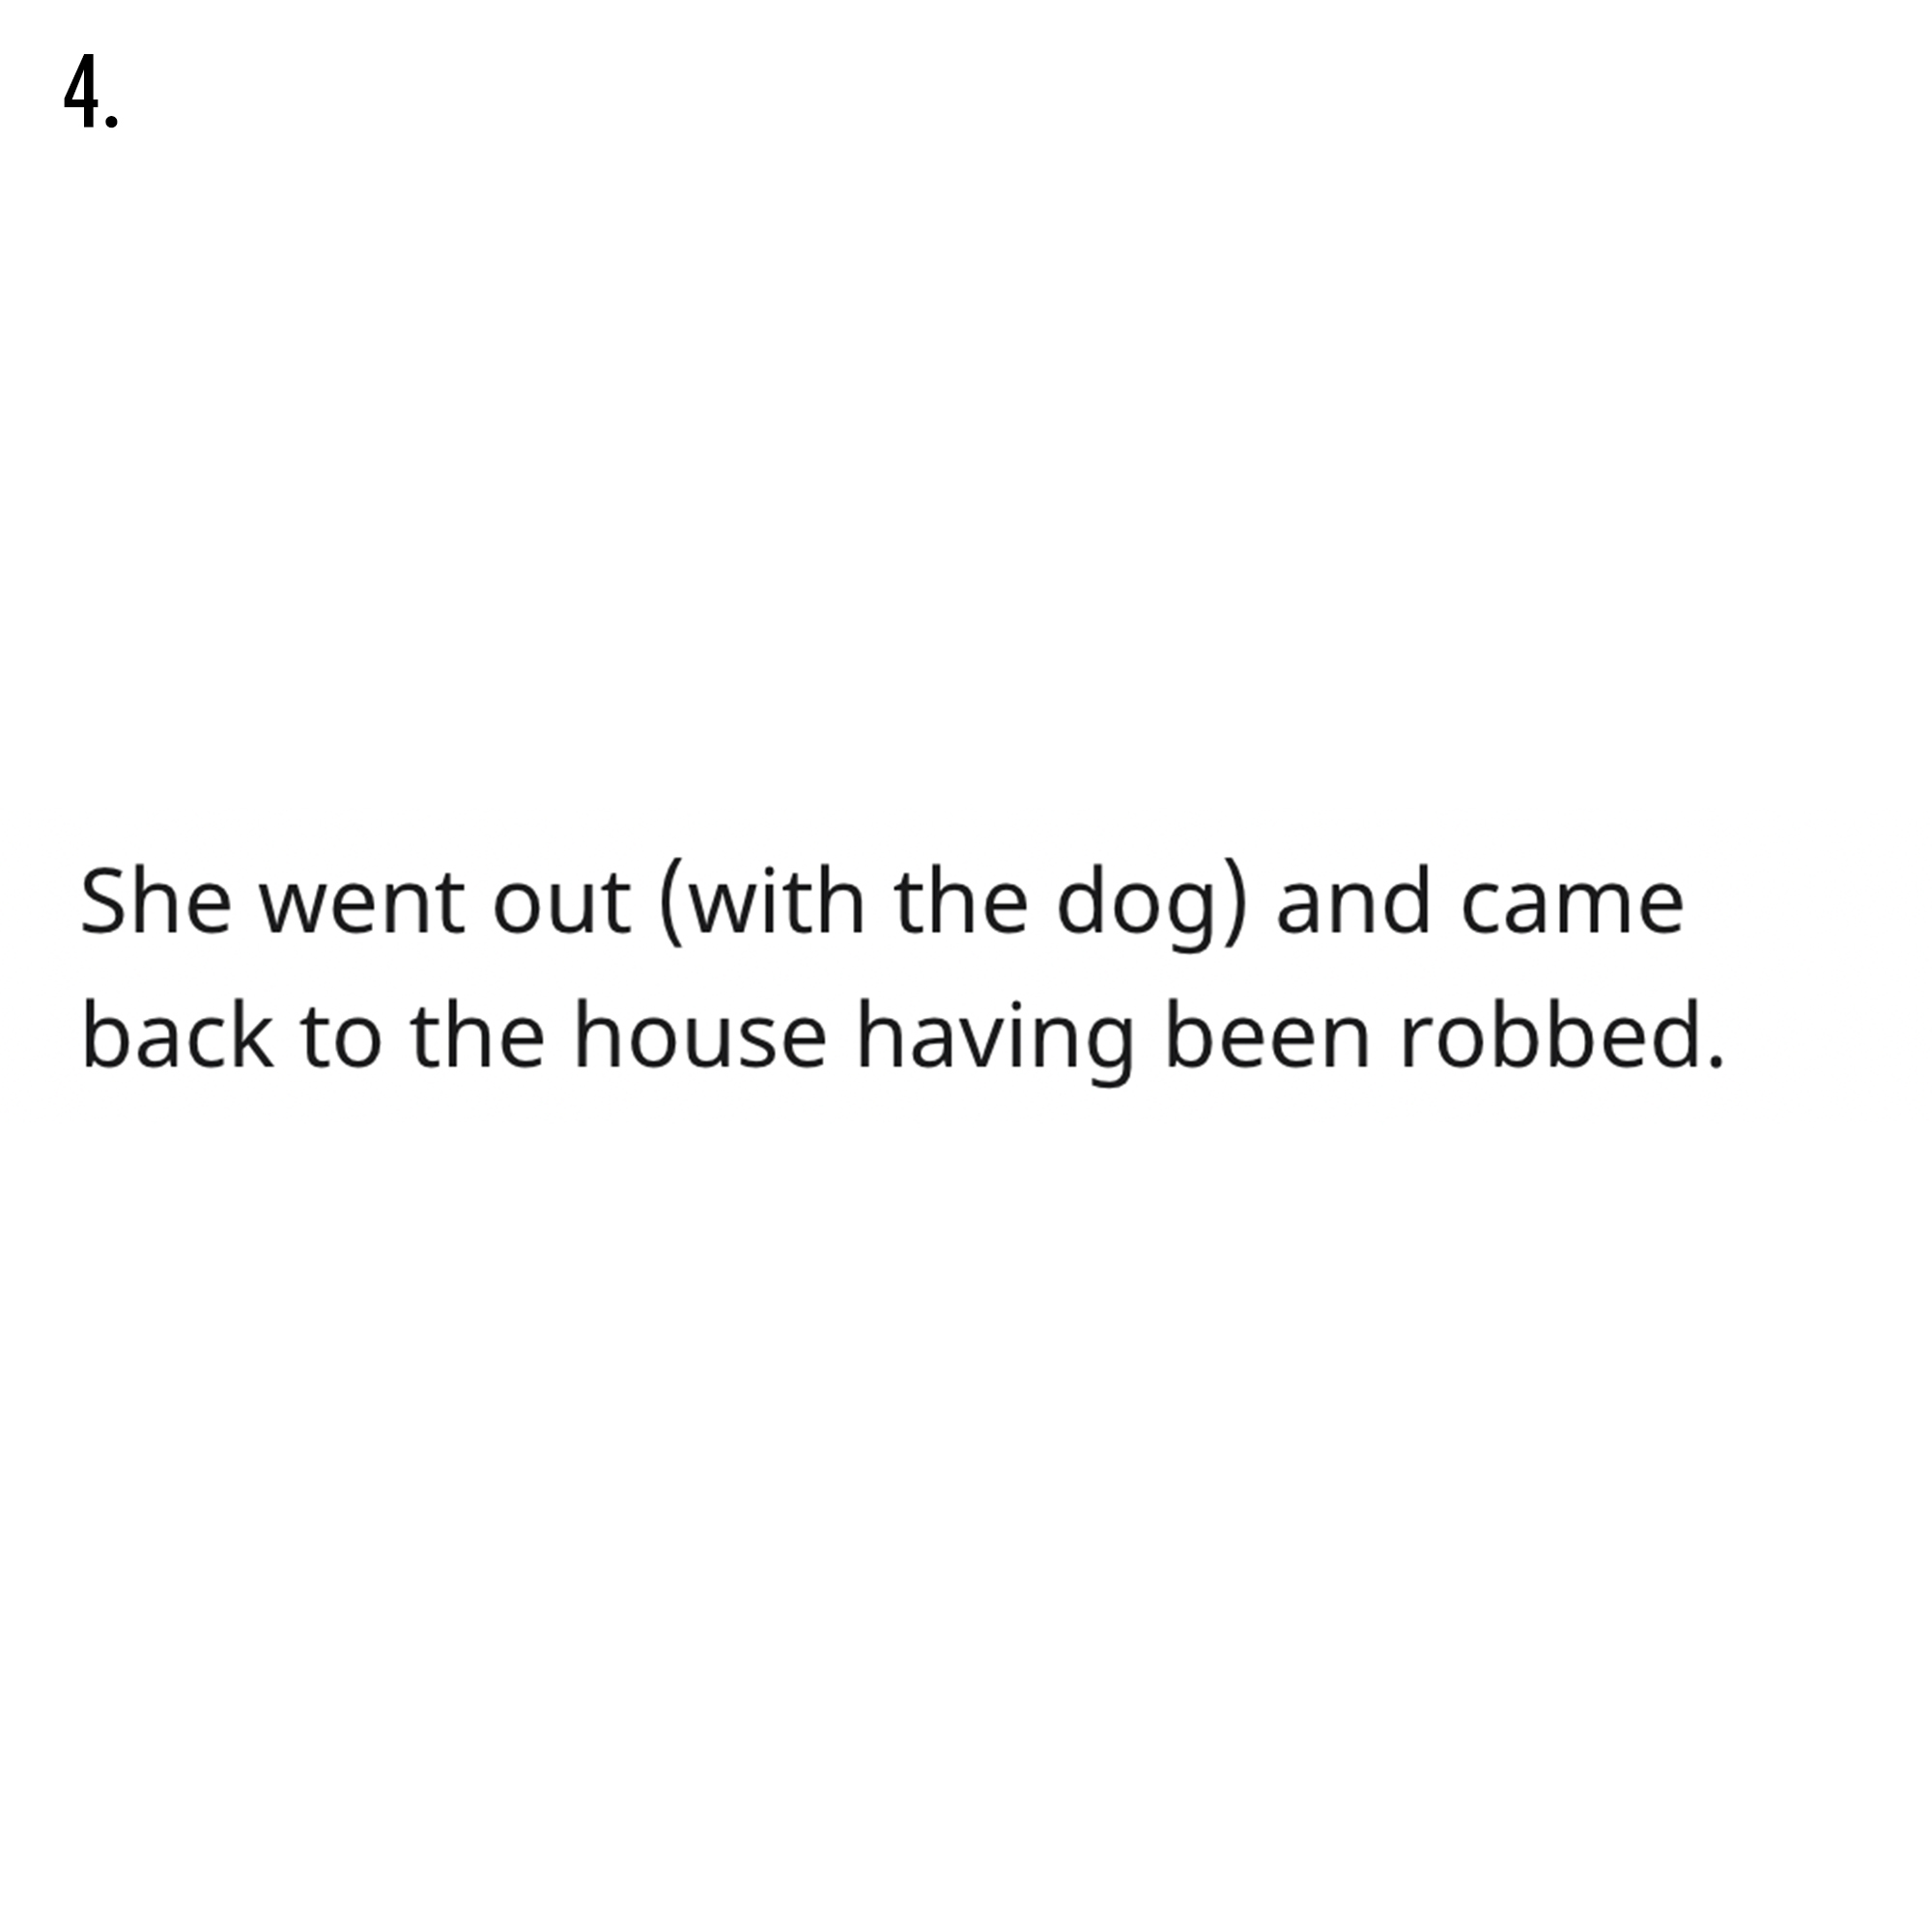 AITA Reddit Story - document - 4. She went out with the dog and came back to the house having been robbed.